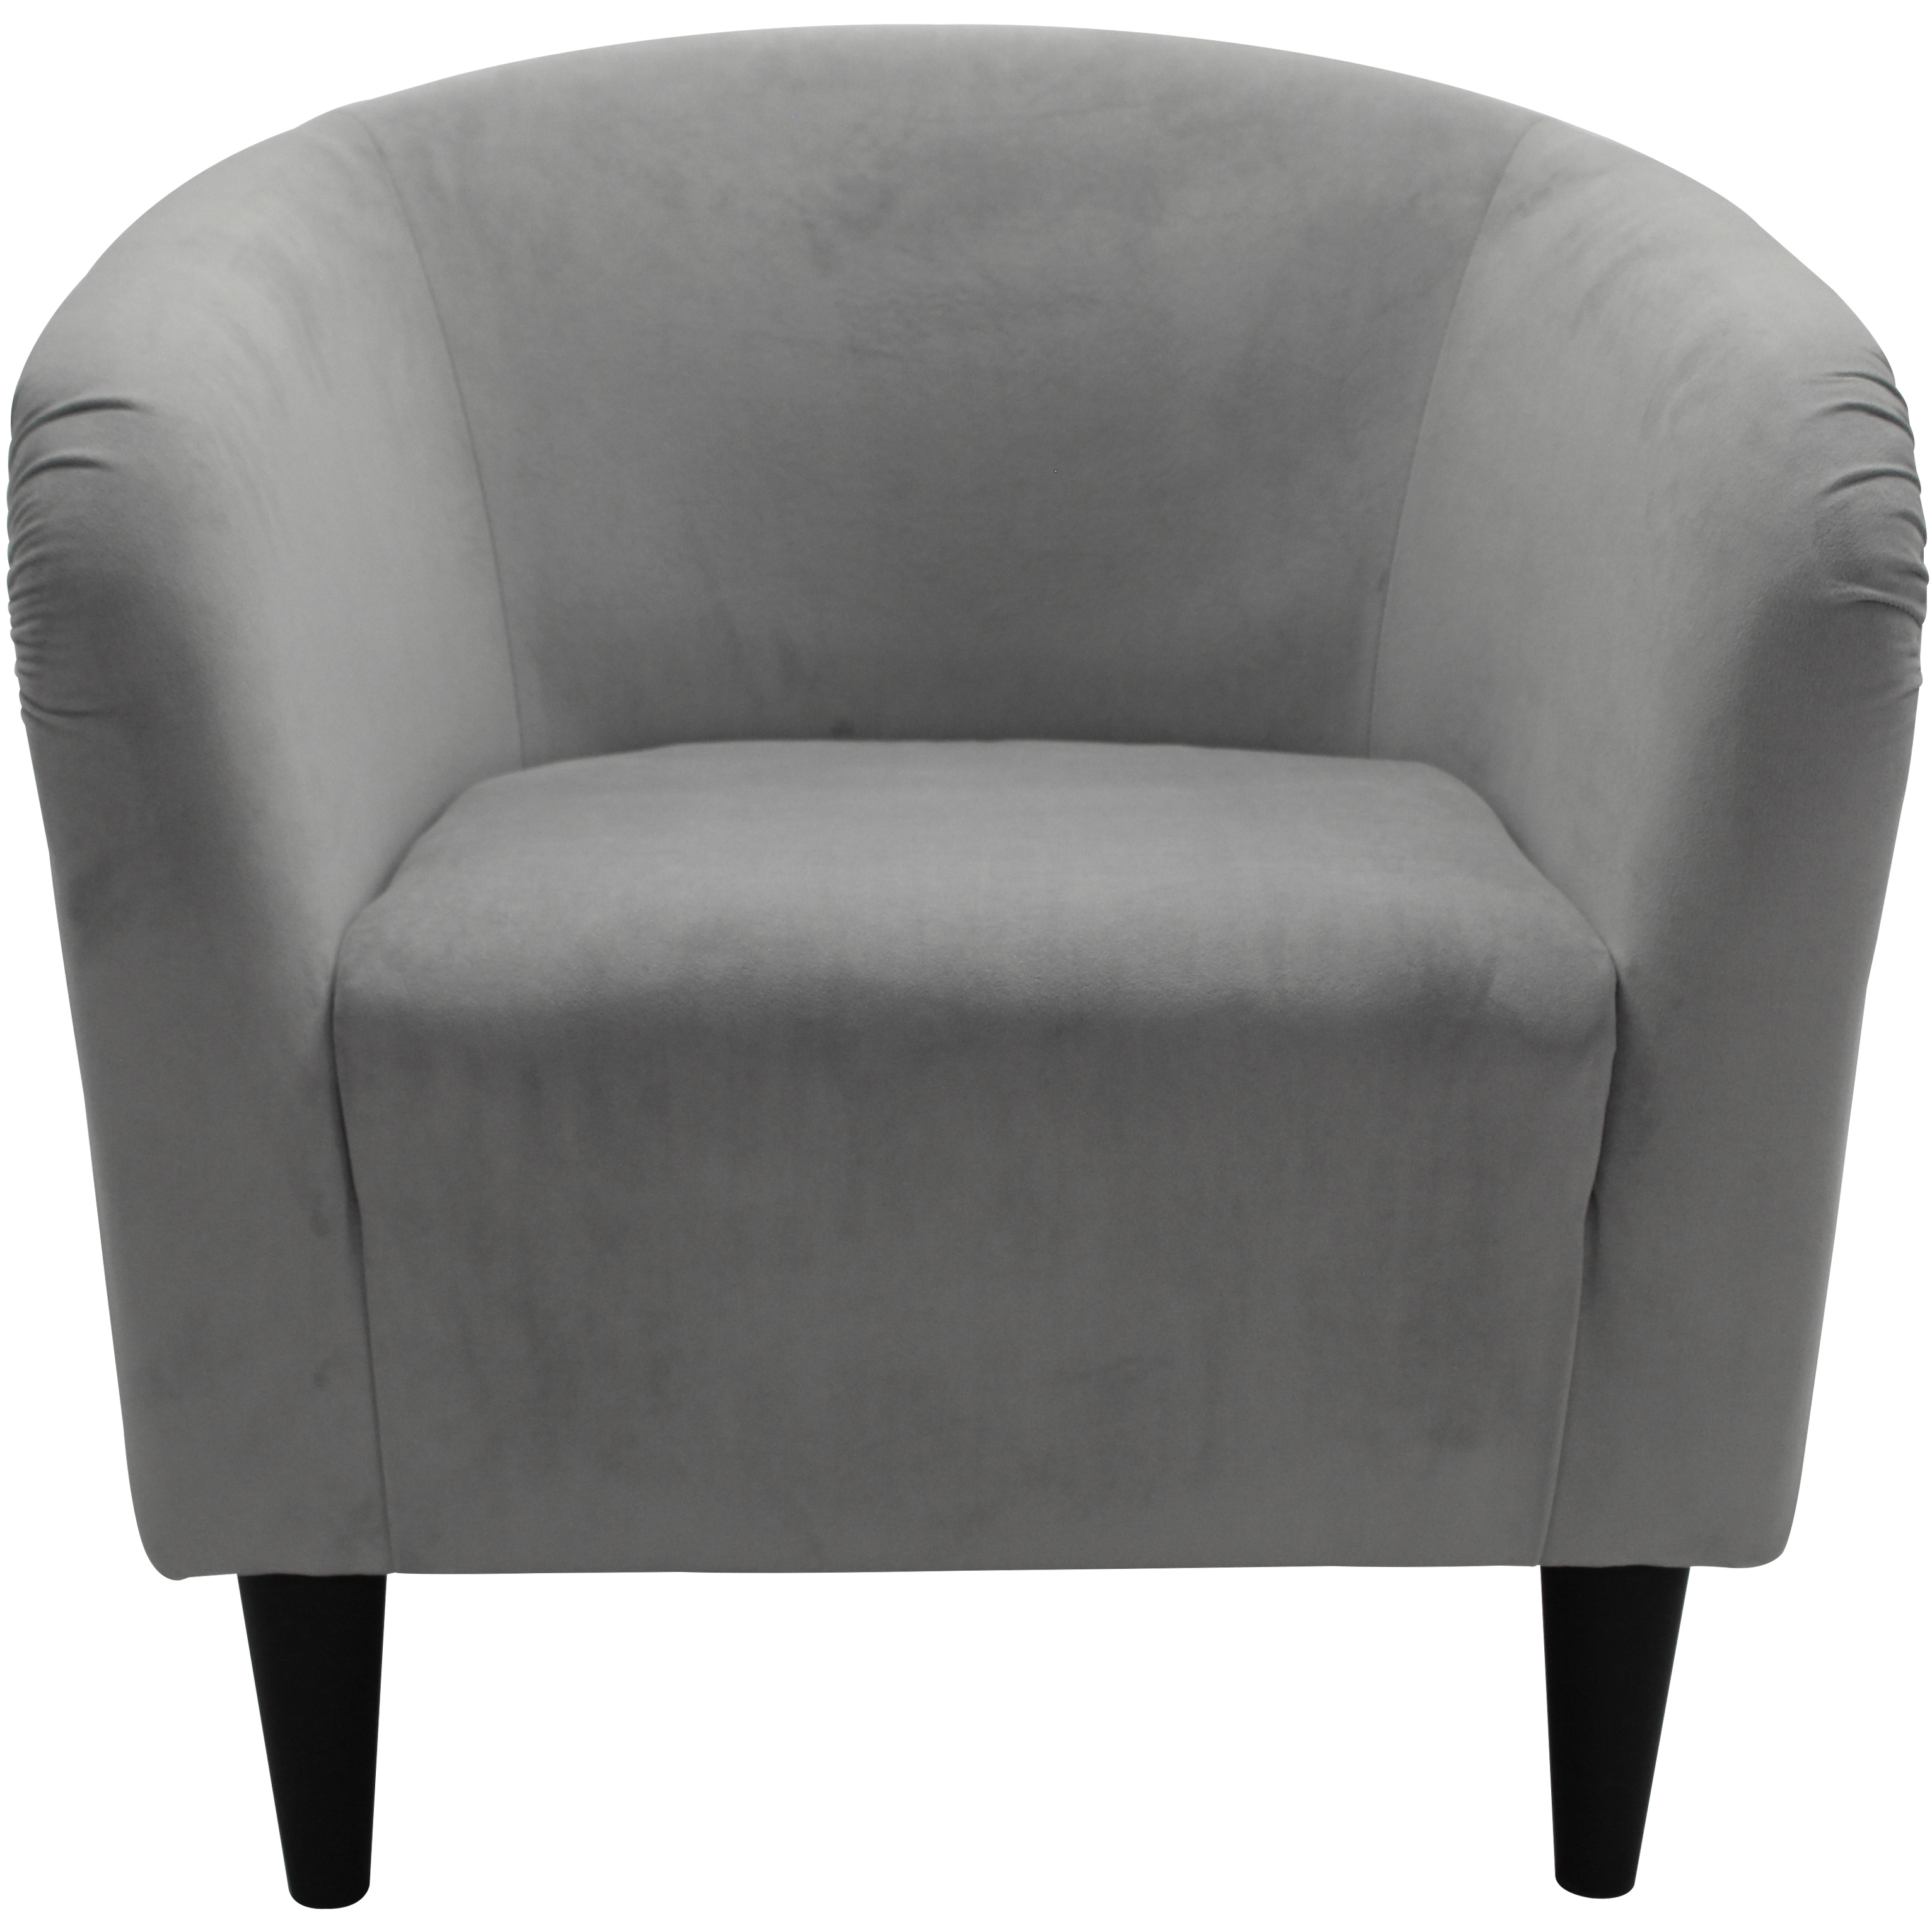 Mainstays Microfiber Tub Accent Chair, Dove Gray - image 2 of 8